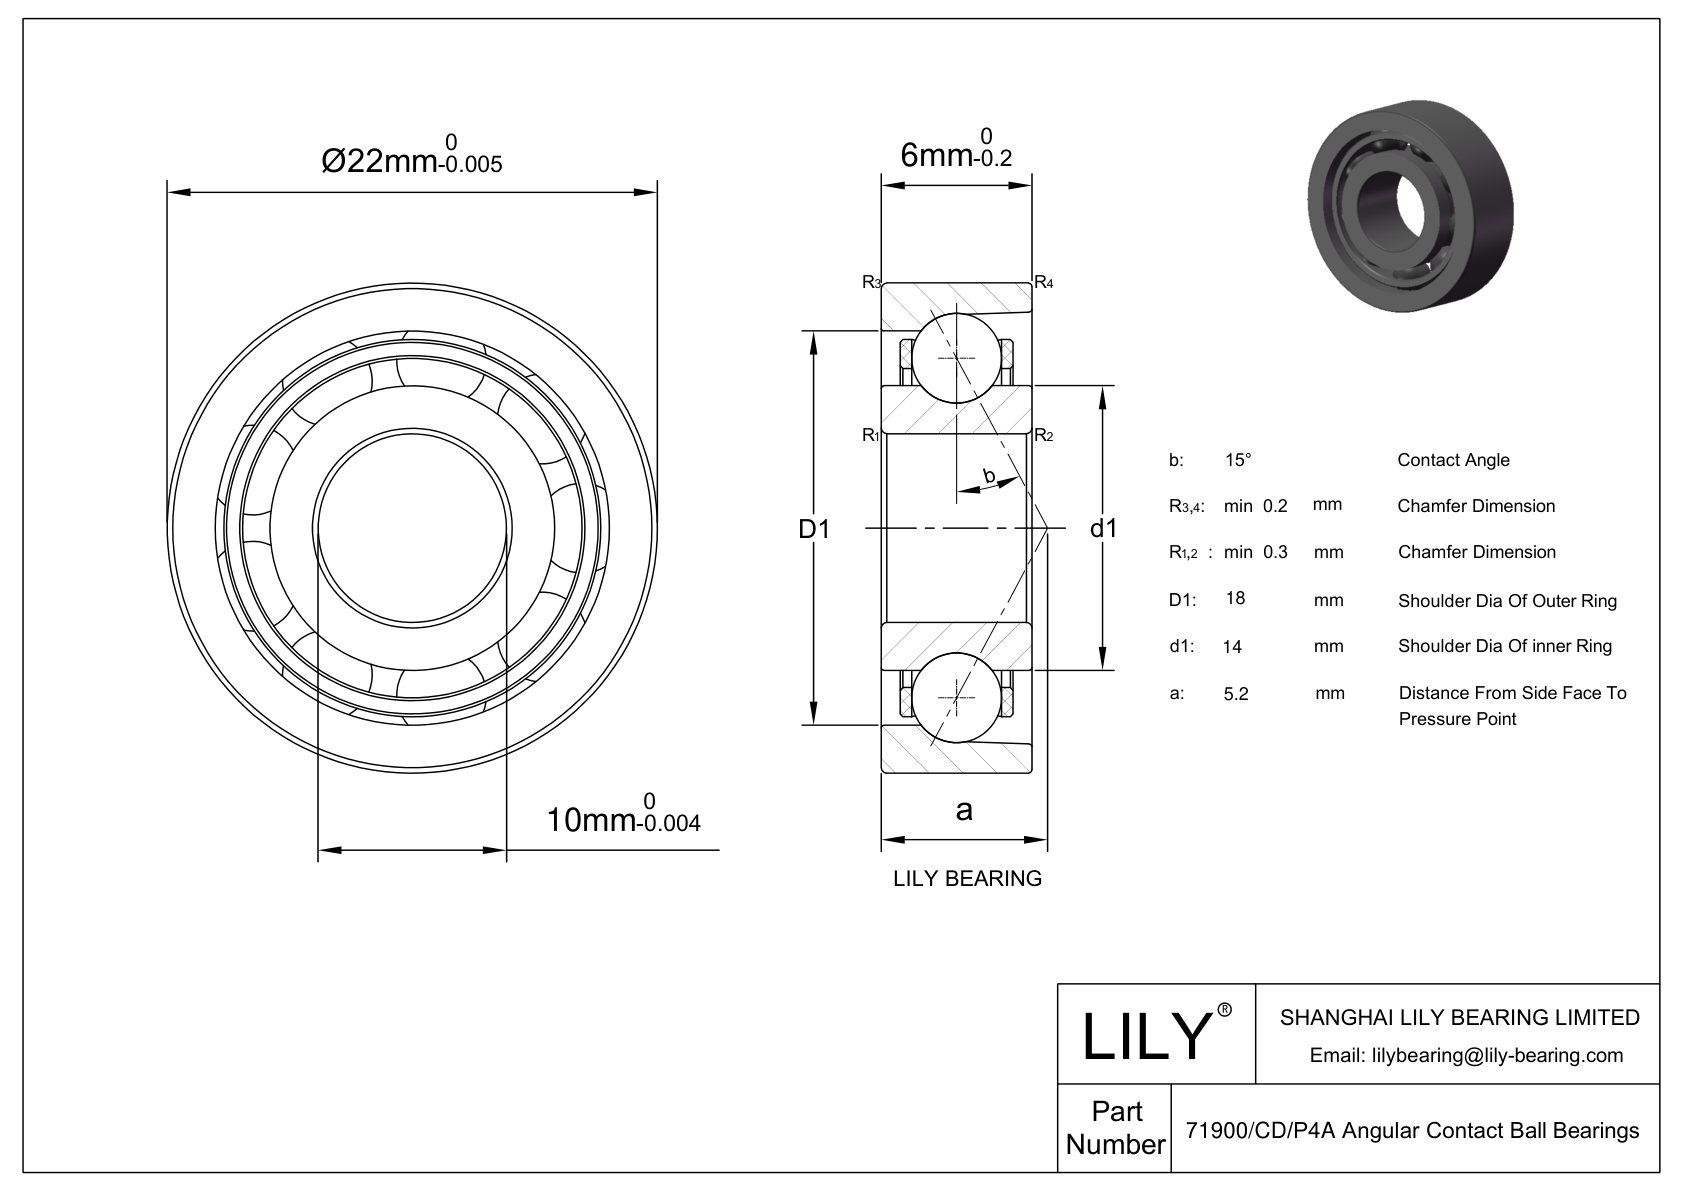 HSS71900-C-T-P4S-UL FAG Super Precision Angular Contact Spindle Bearing cad drawing